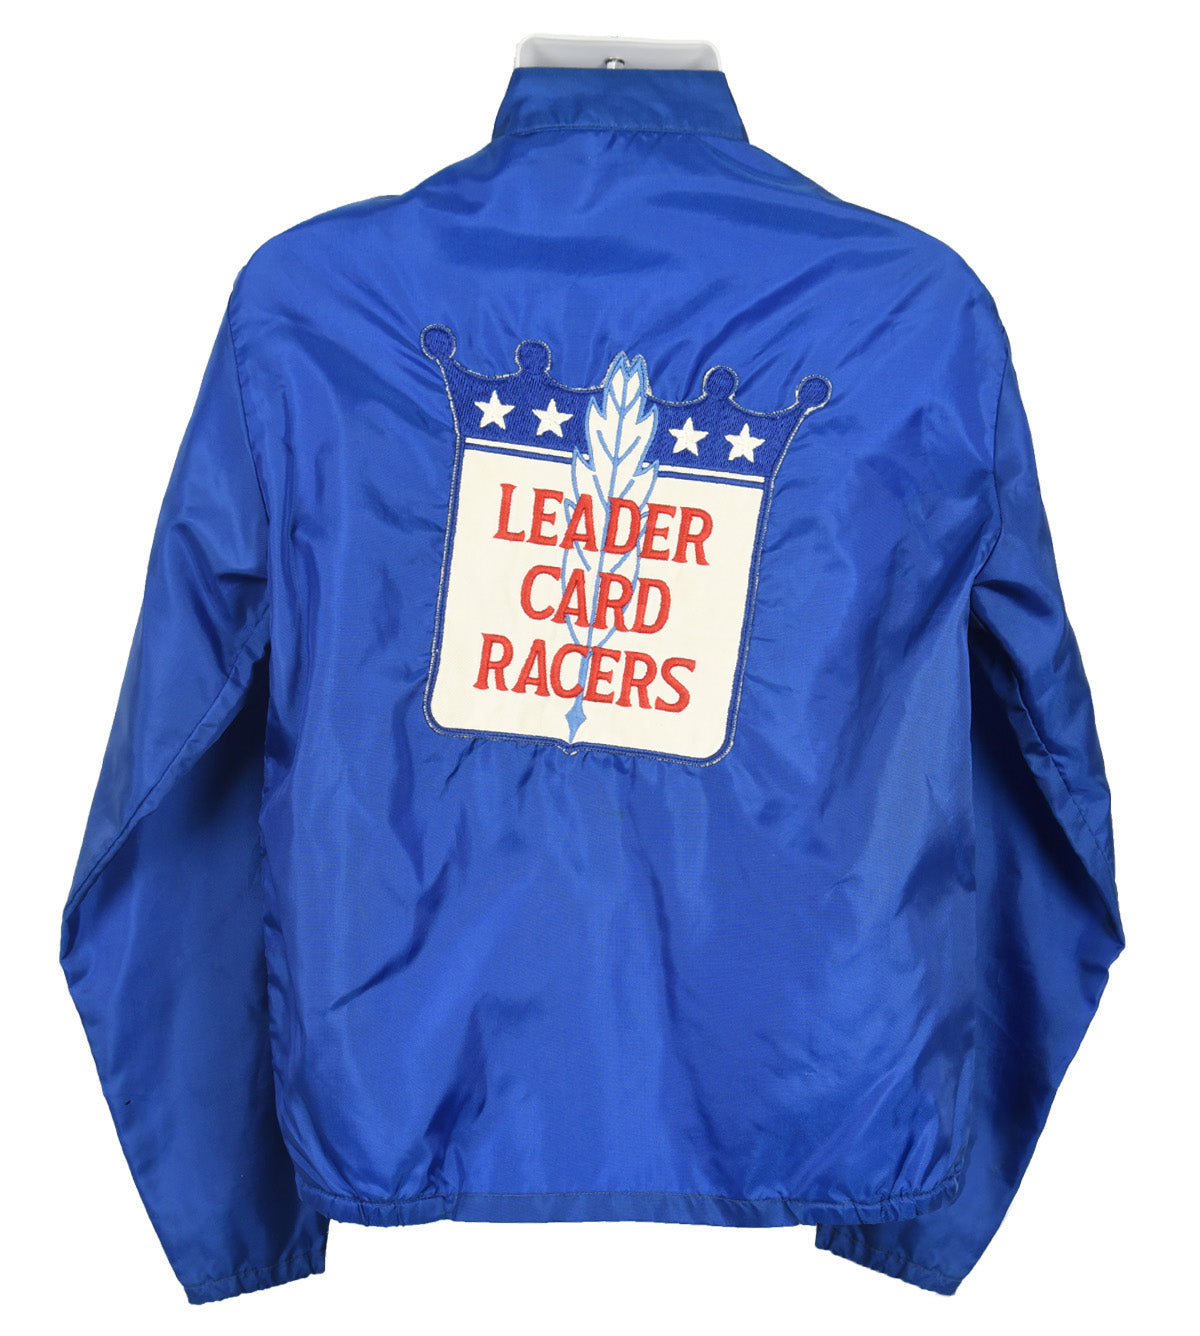 1973/74 Mike Mosley Personally Worn Leader Card Racers Indy 500 Jacket